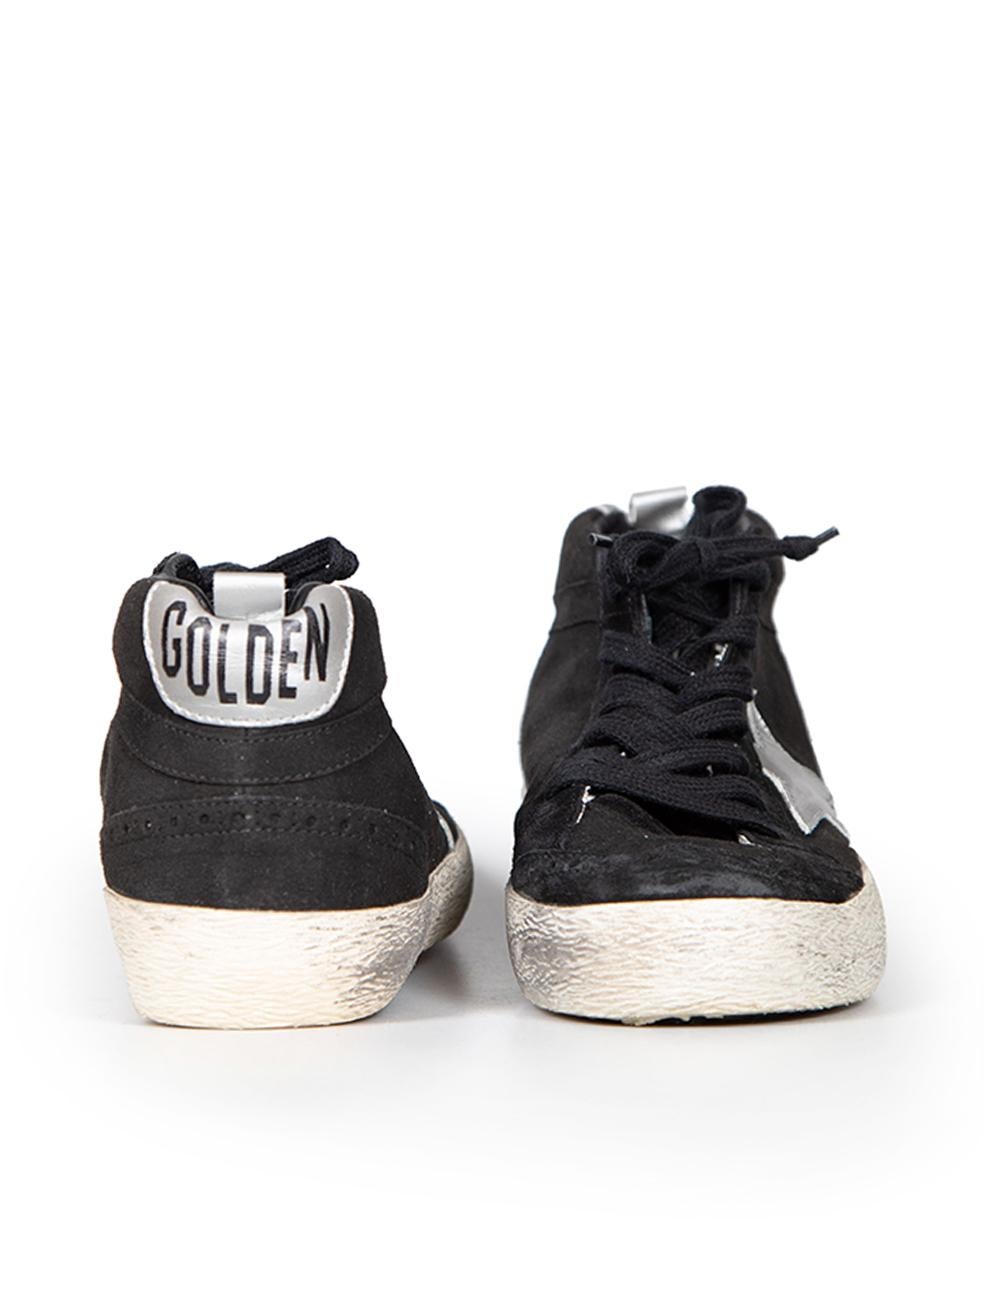 Golden Goose Black Suede Superstar Trainers Size IT 37 In Good Condition For Sale In London, GB